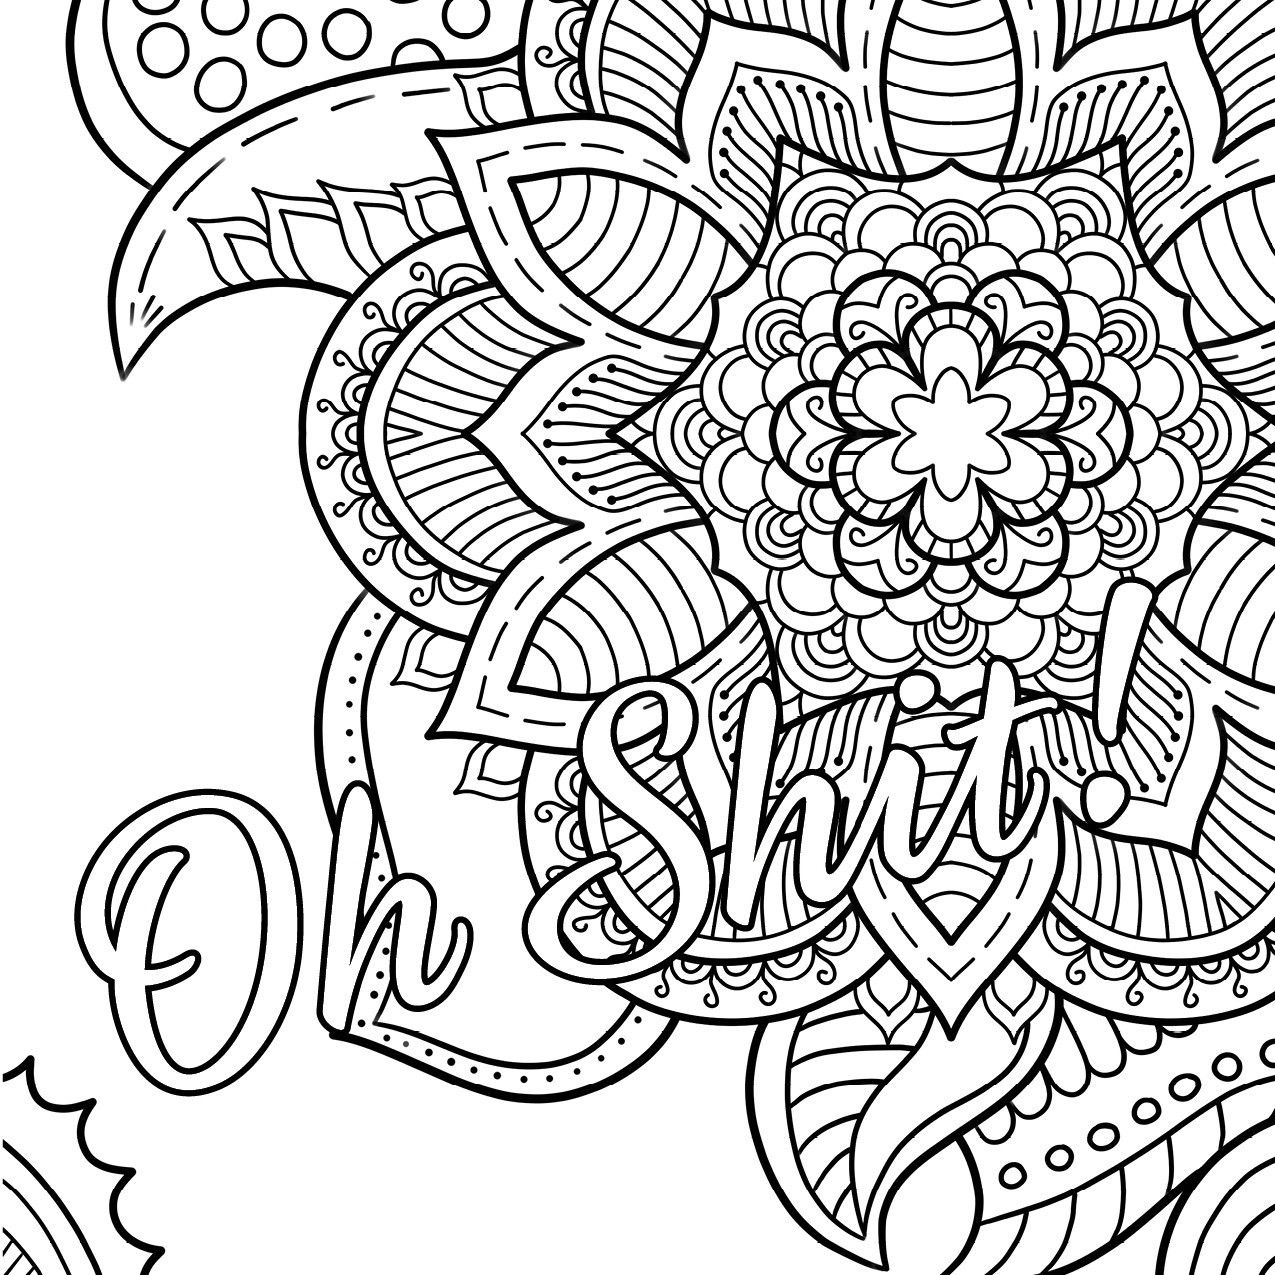 Swear Word Coloring Book #2 Free Printable Coloring Pages For Adults - Free Printable Swear Word Coloring Pages